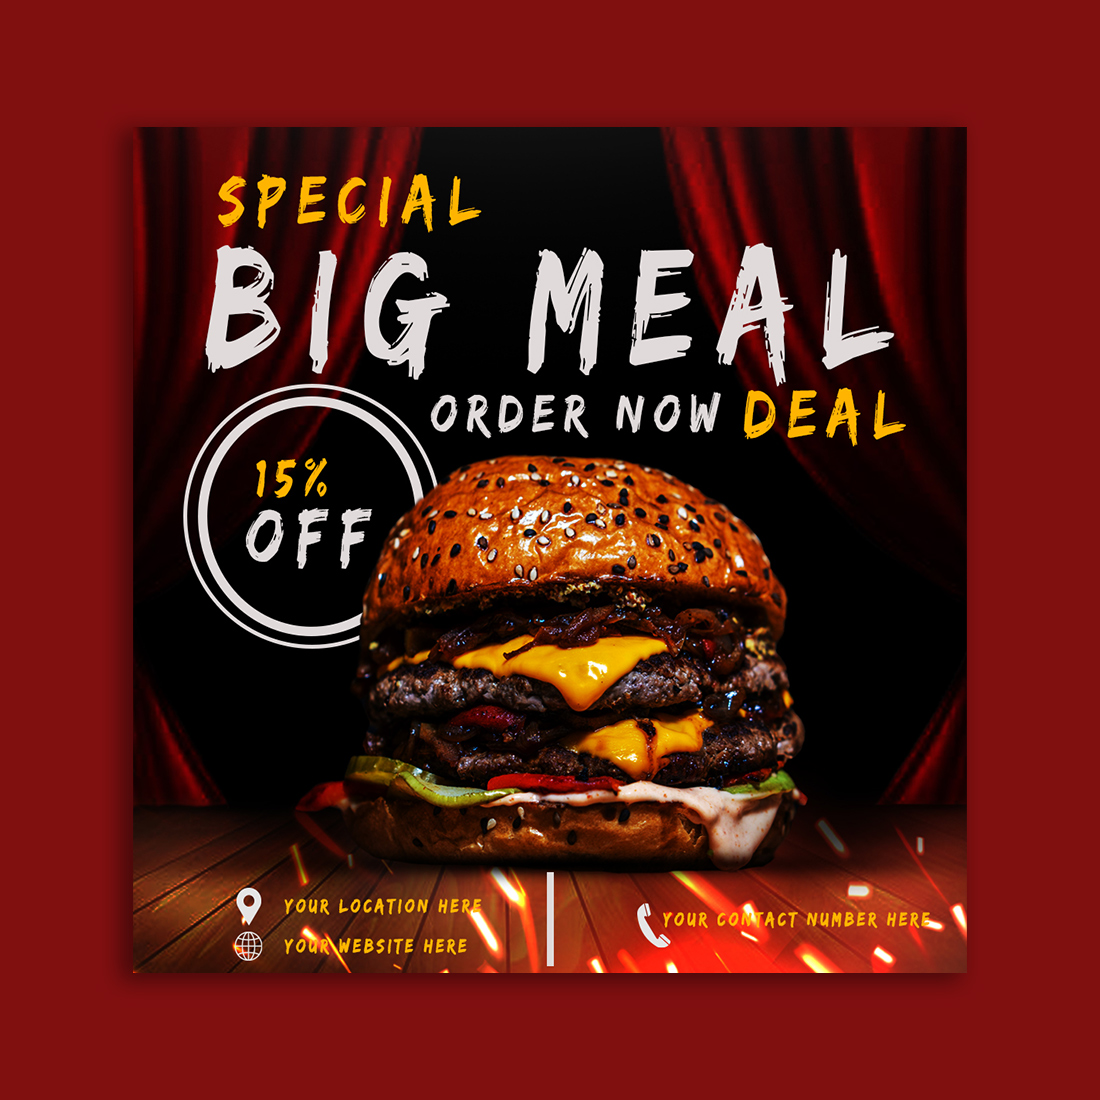 Resturant advertising food social media post template and web banner instagram cover image.